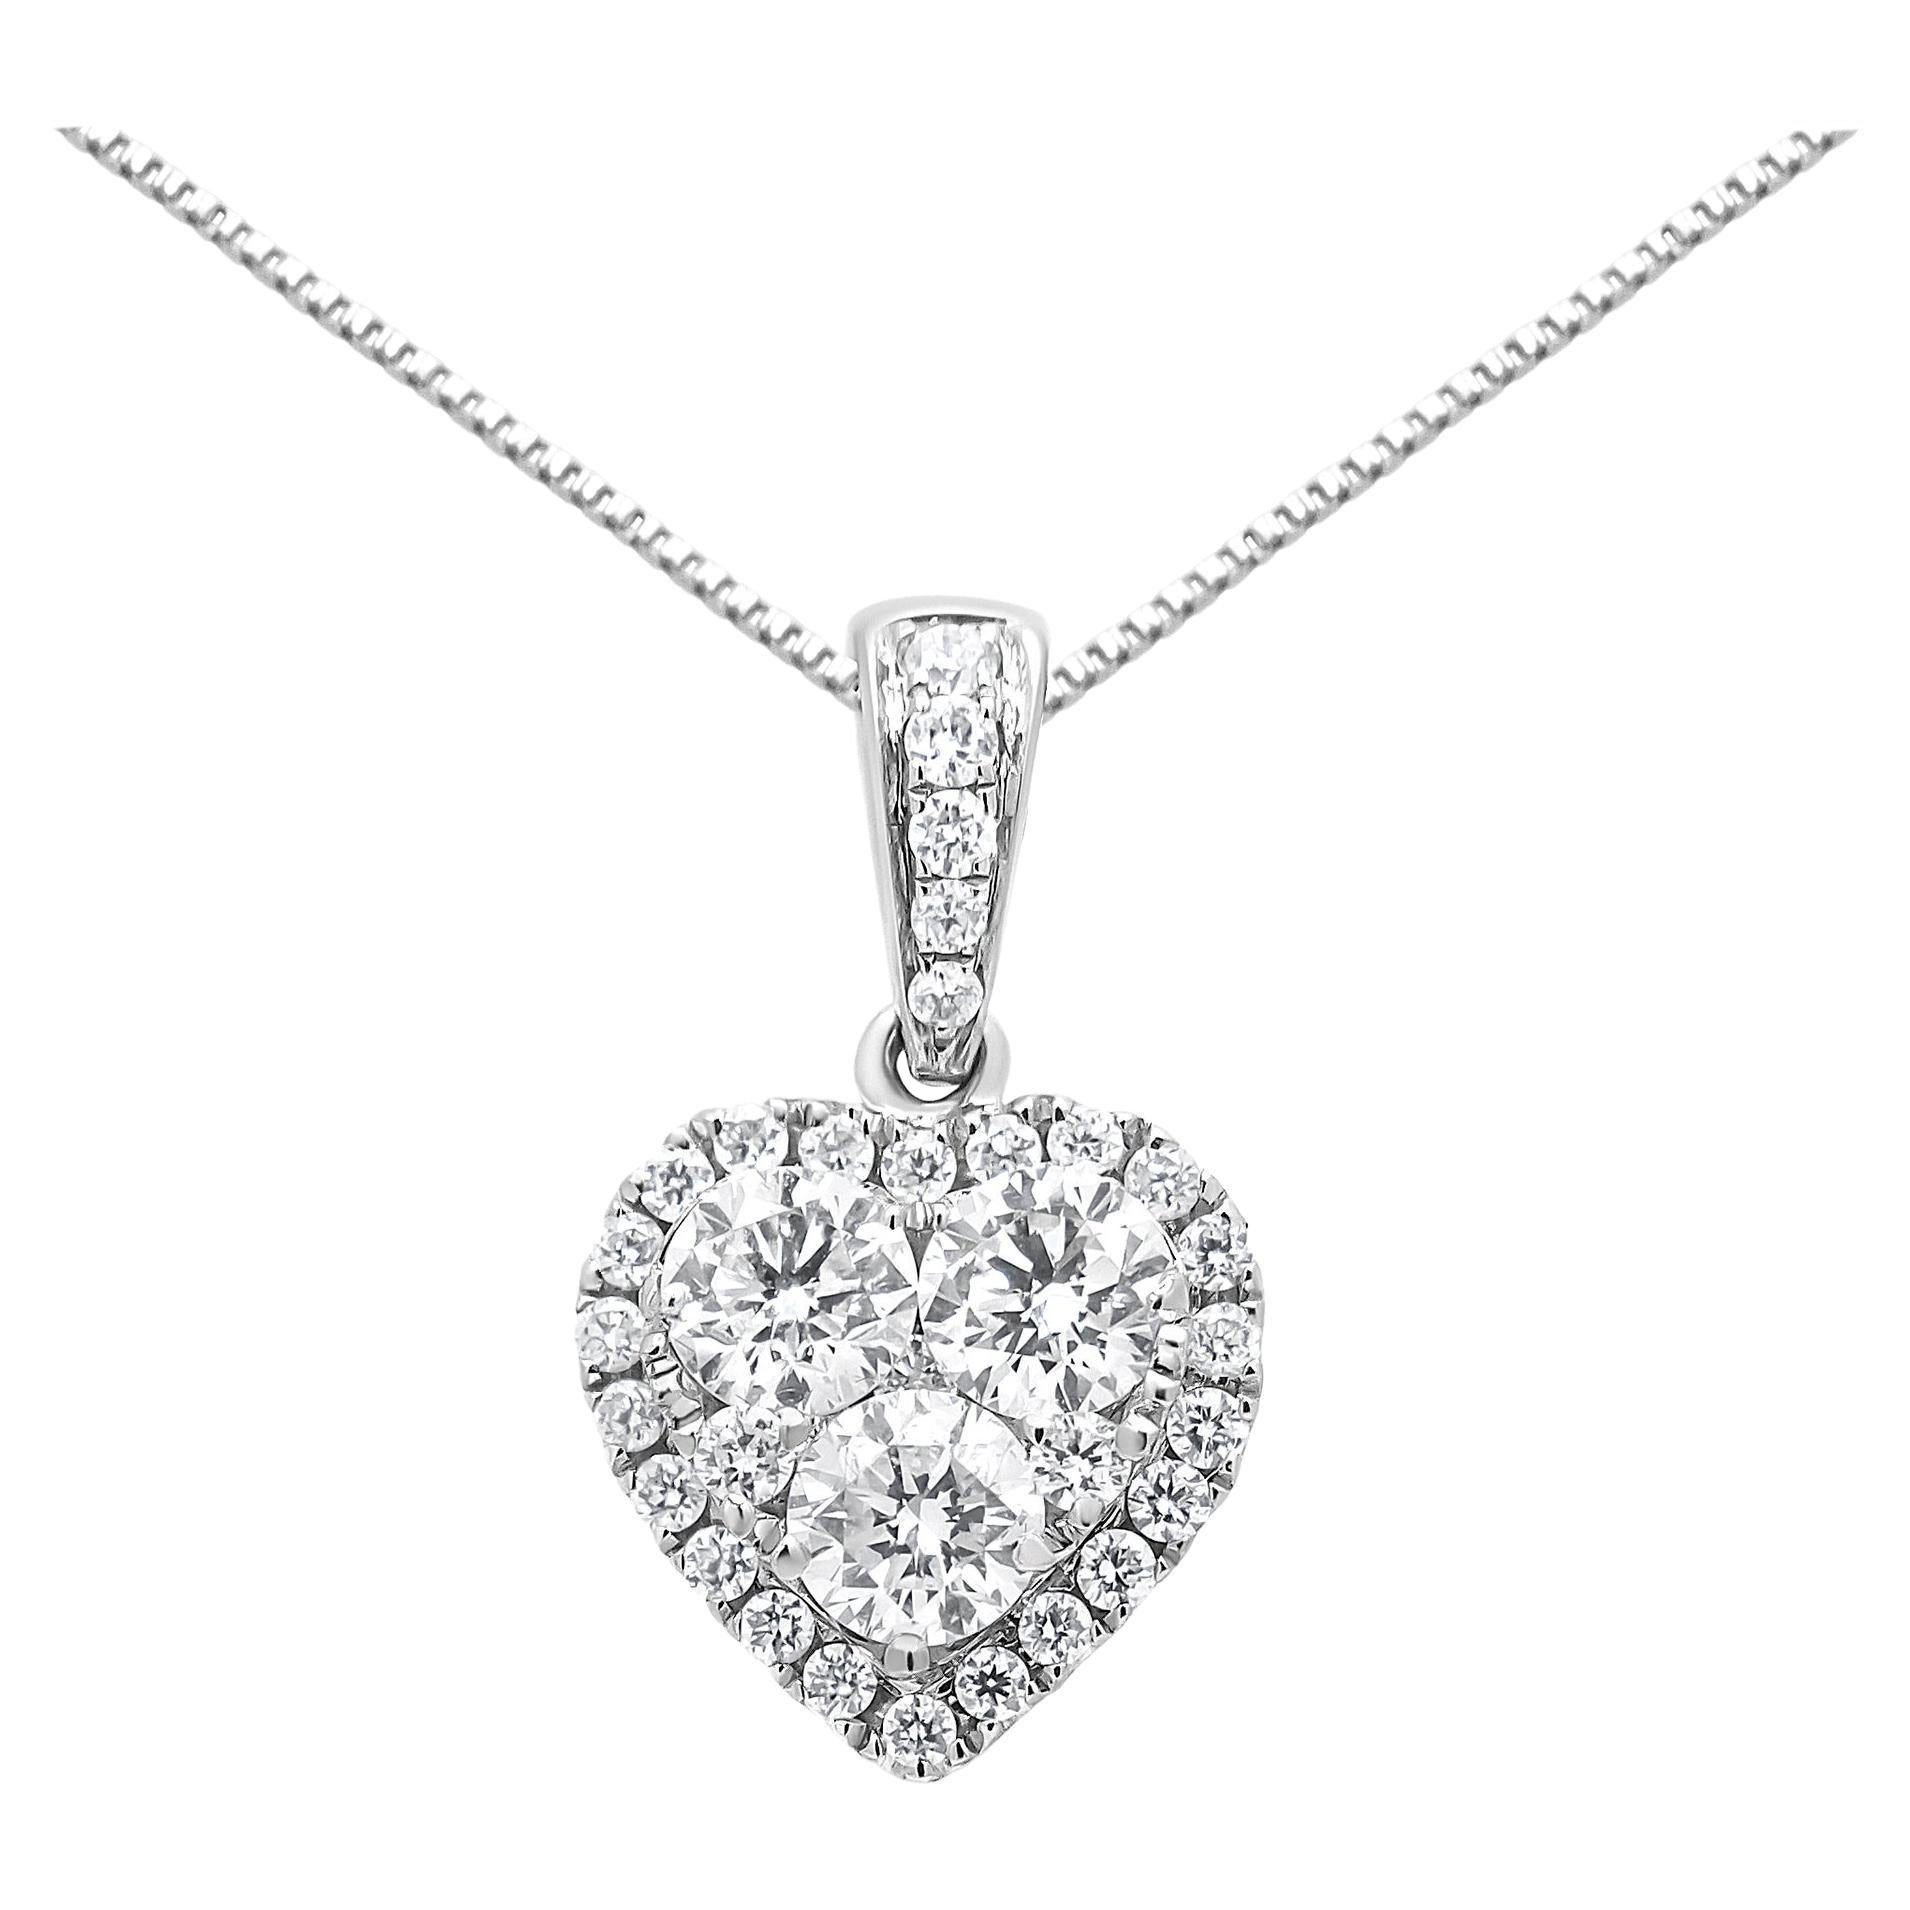 18k White Gold 5 8 Carat Round Diamond Halo Heart Cluster Pendant Necklace For Sale At 1stdibs